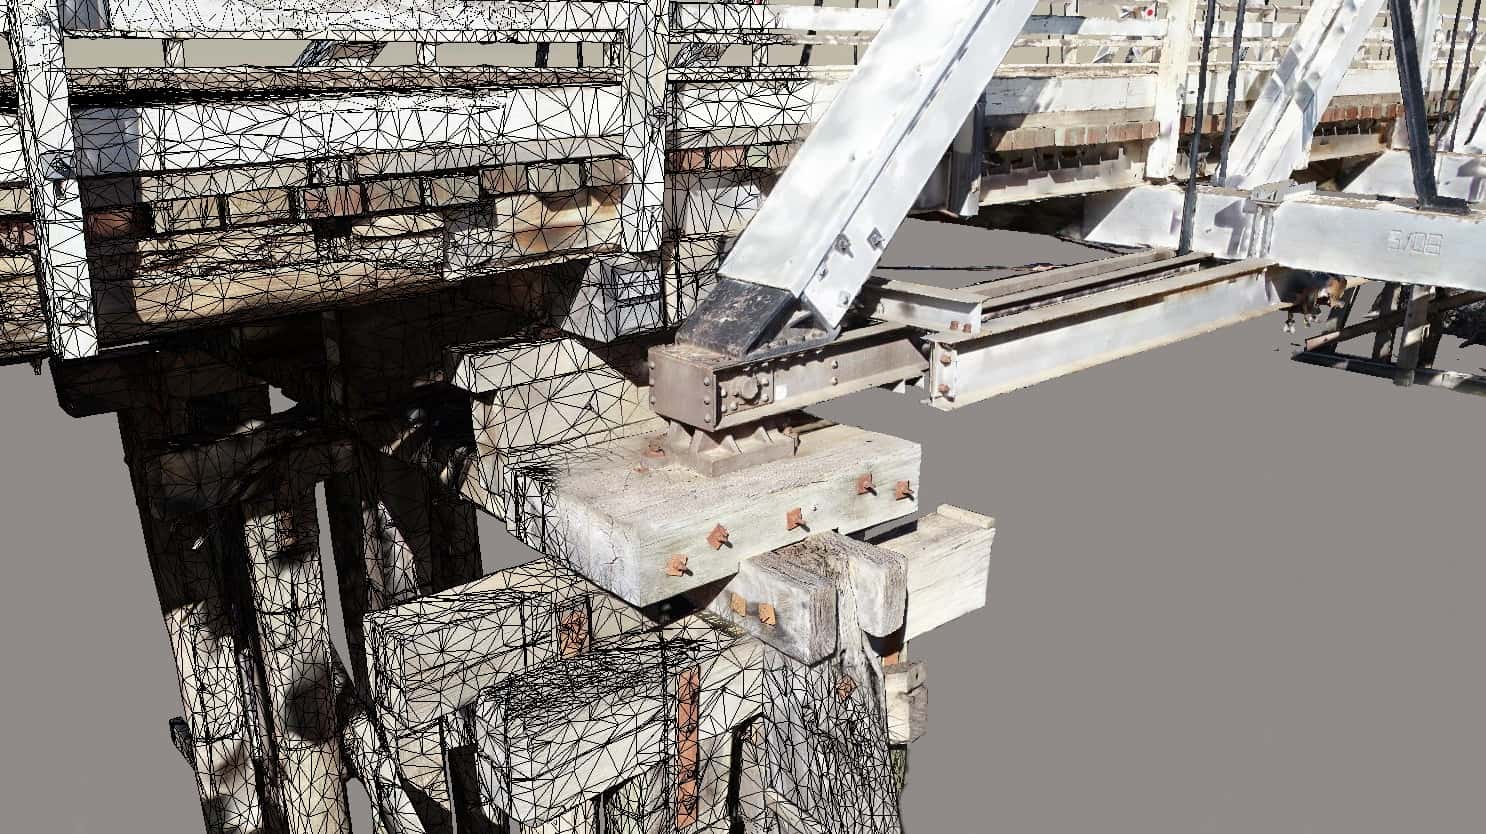 3D textured mesh and high density point cloud of bridge for photogrammetry modelling of a bridge